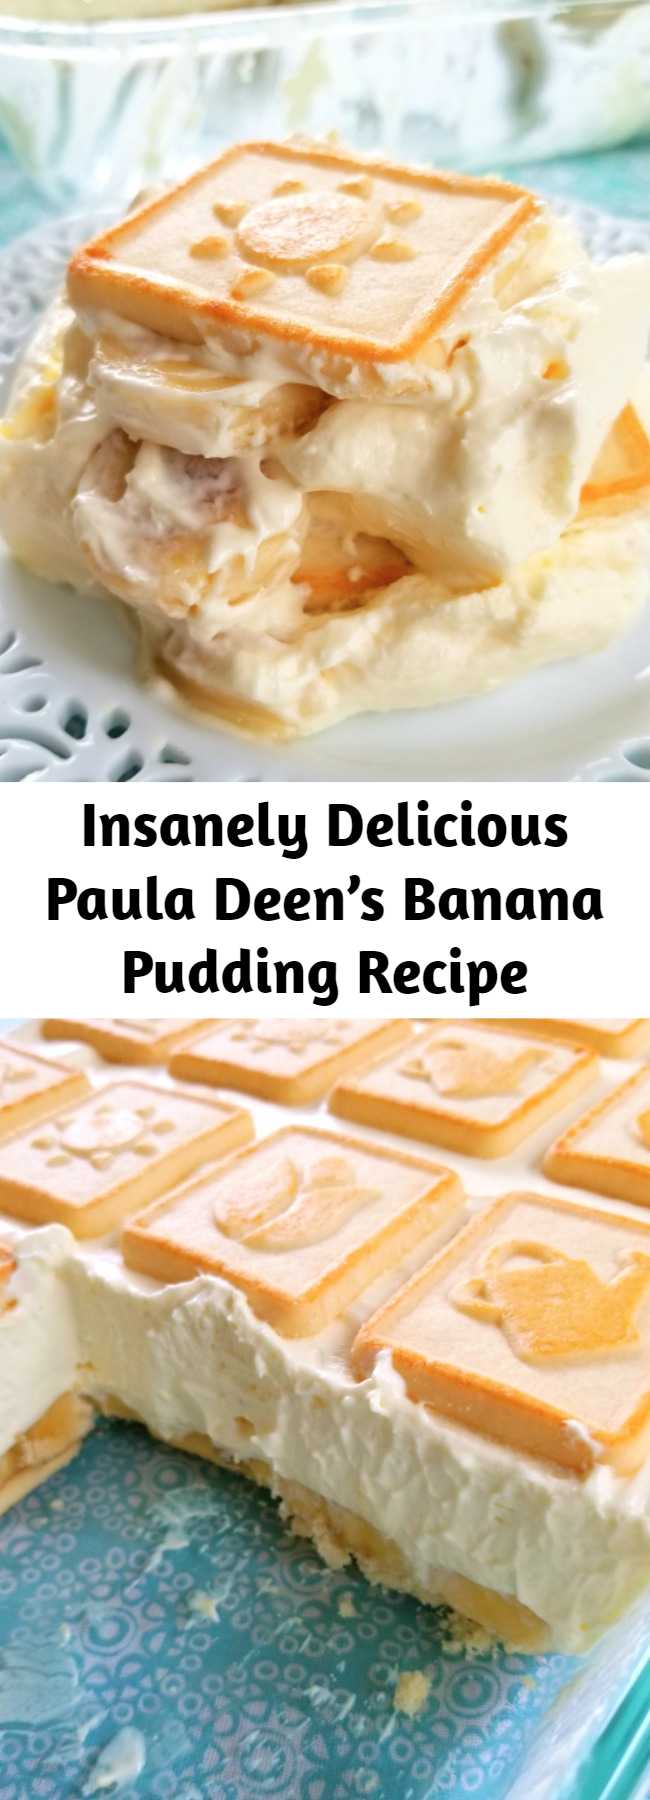 Insanely Delicious Paula Deen’s Banana Pudding Recipe - This iconic layered dessert recipe for Banana Pudding with cream cheese and sweetened condensed milk isn't the Banana Pudding you grew up with but it's a classic for a reason - it's insanely delicious!